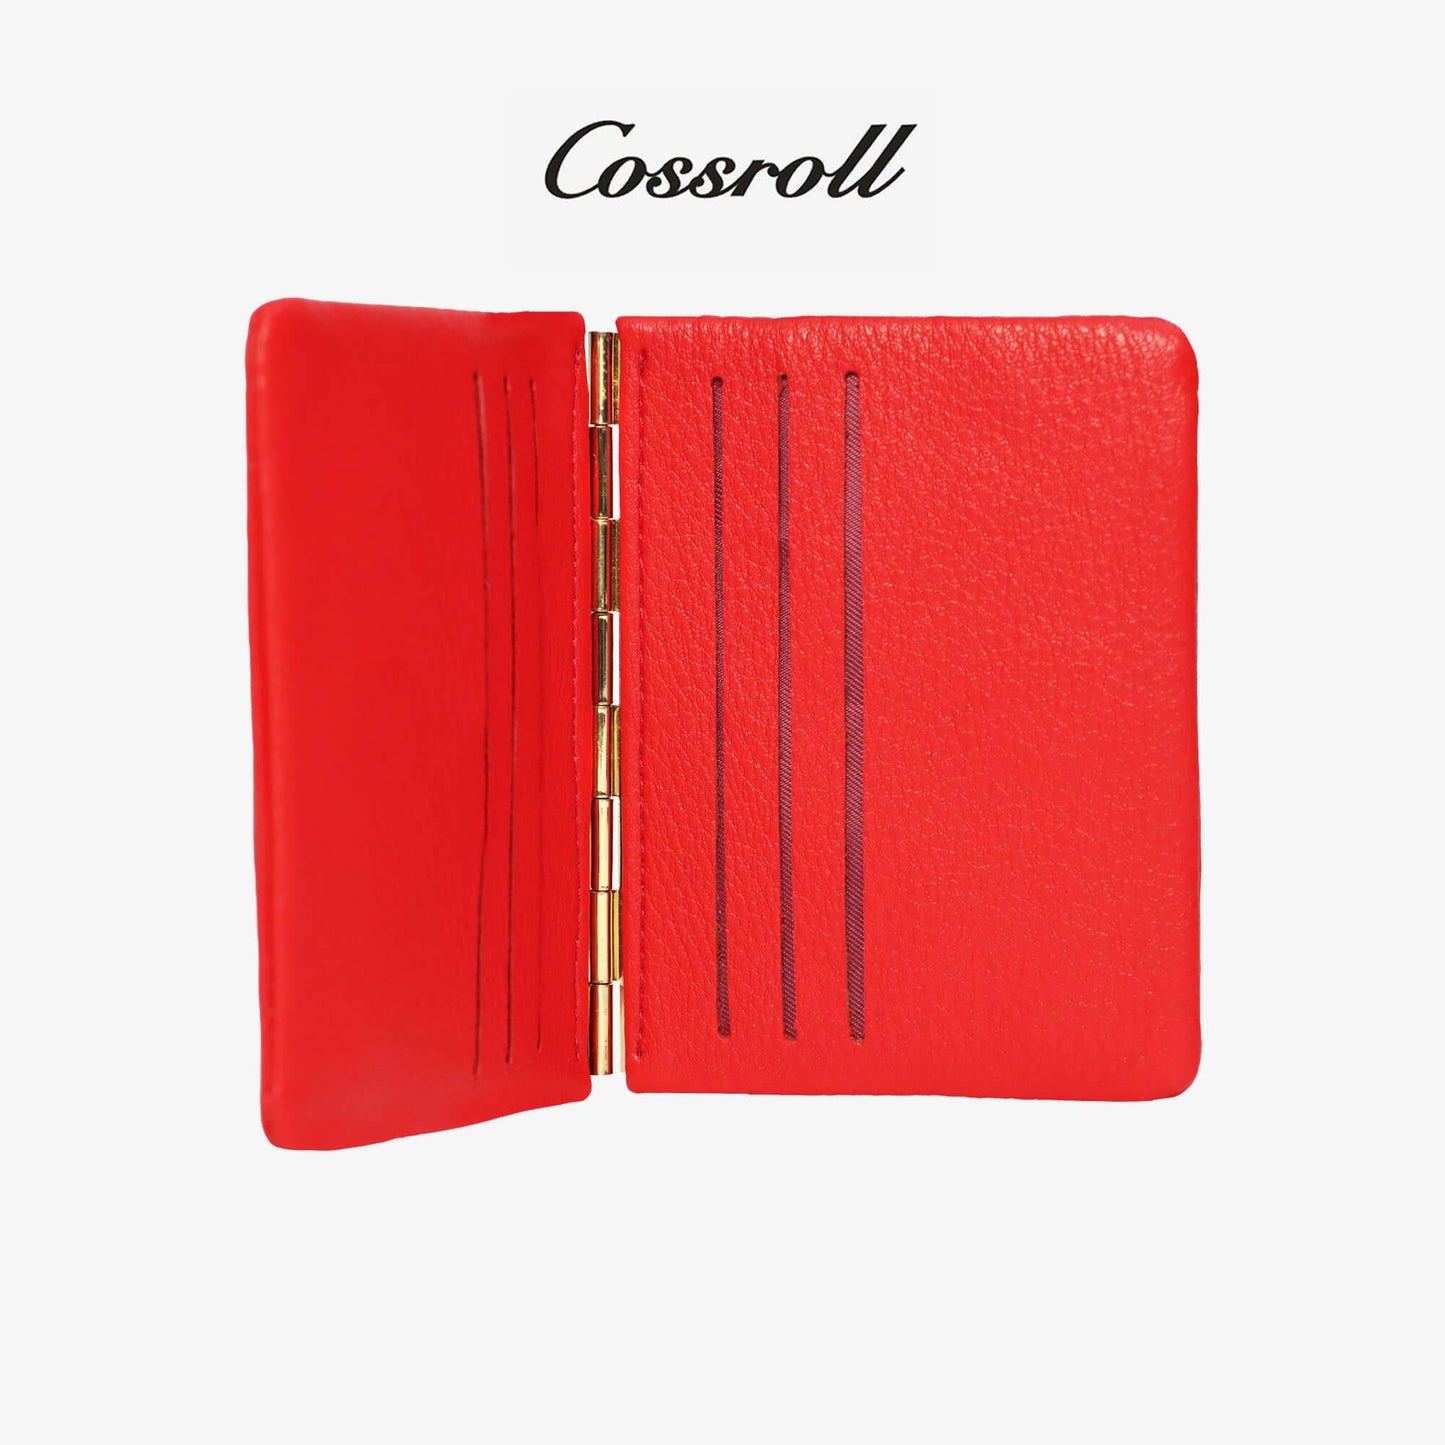 PU Leather Card Holder Logo Prints Customized - cossroll.leather